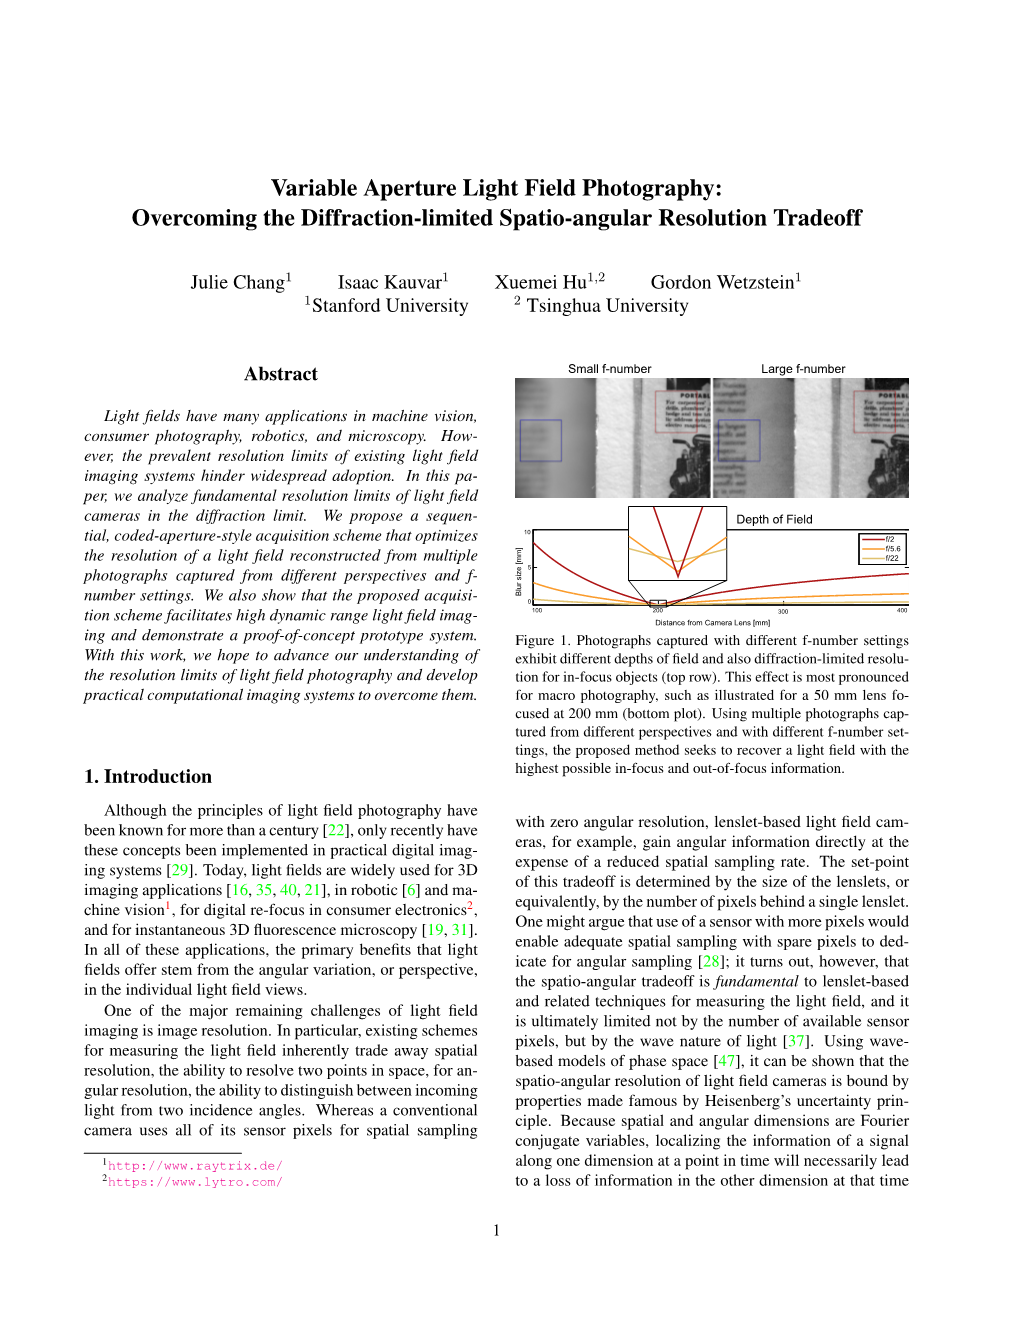 Variable Aperture Light Field Photography: Overcoming the Diffraction-Limited Spatio-Angular Resolution Tradeoff